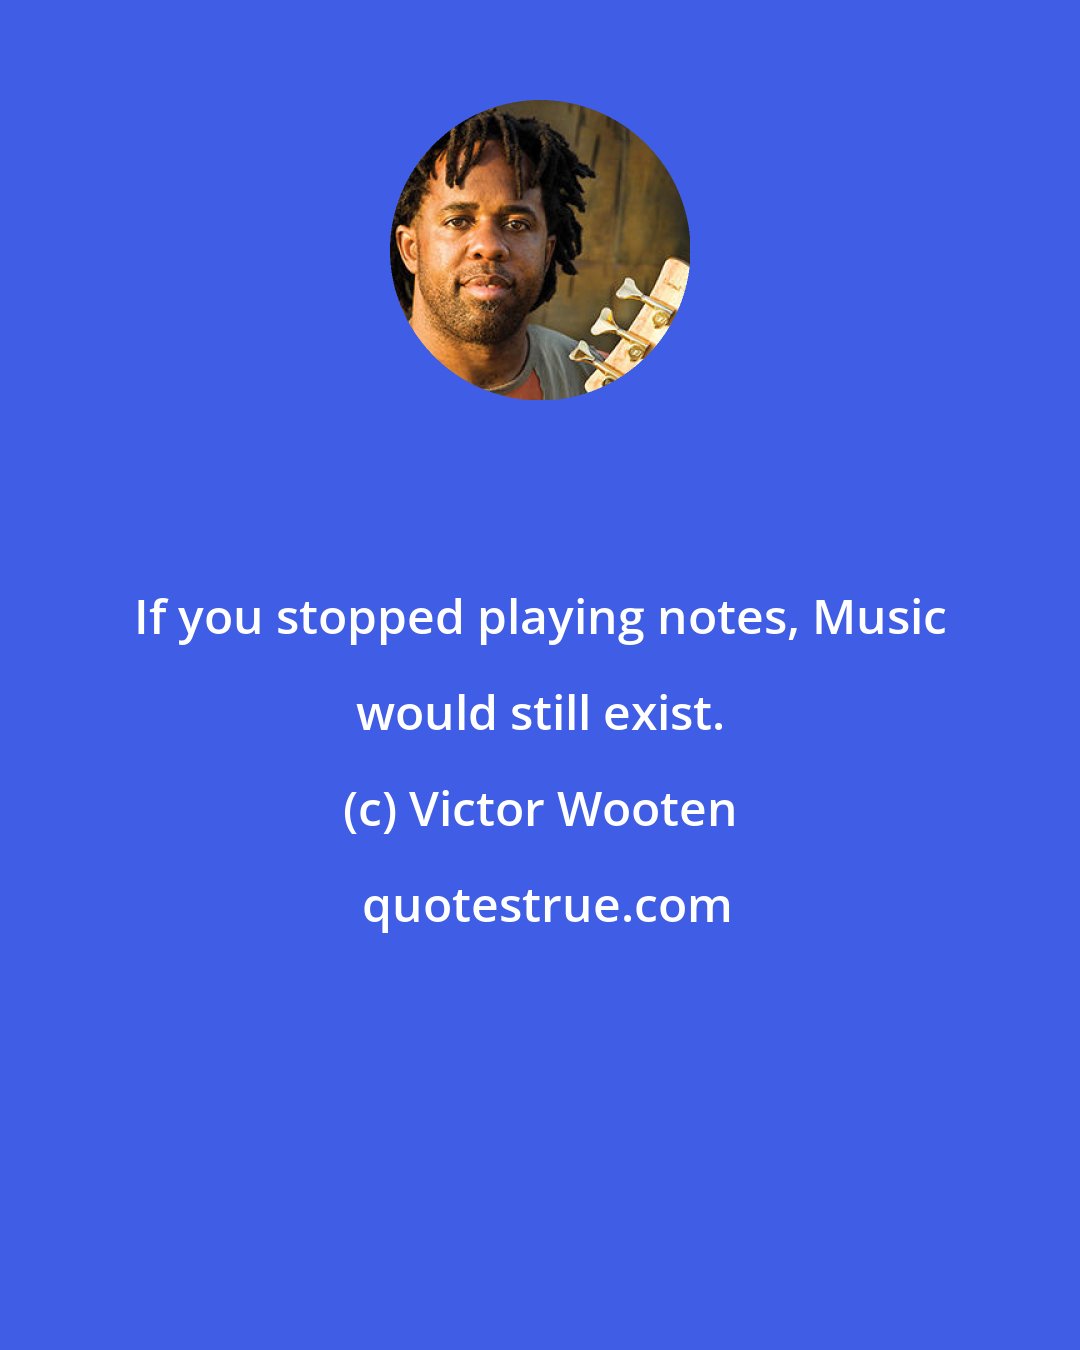 Victor Wooten: If you stopped playing notes, Music would still exist.